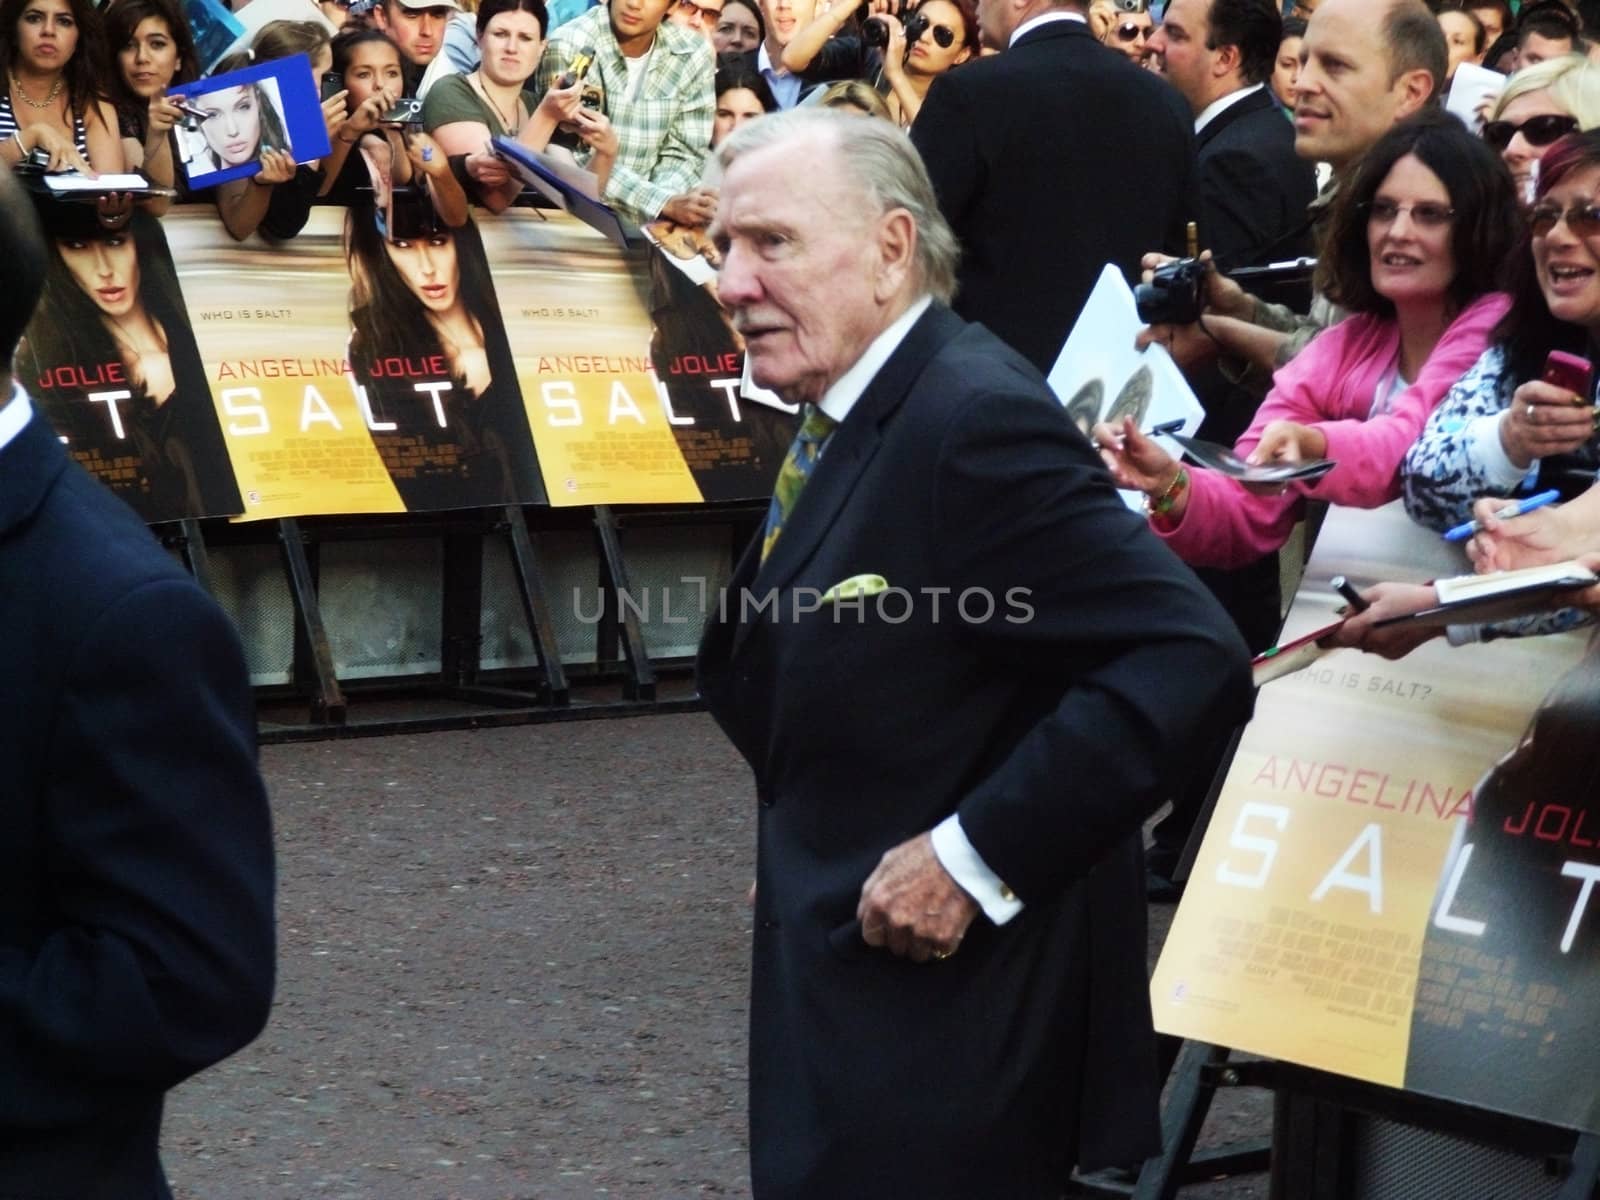 LONDON - August 16: Leslie Philips at Salt Premiere August 16th, 2010 in Leicester Square London, England.                                     